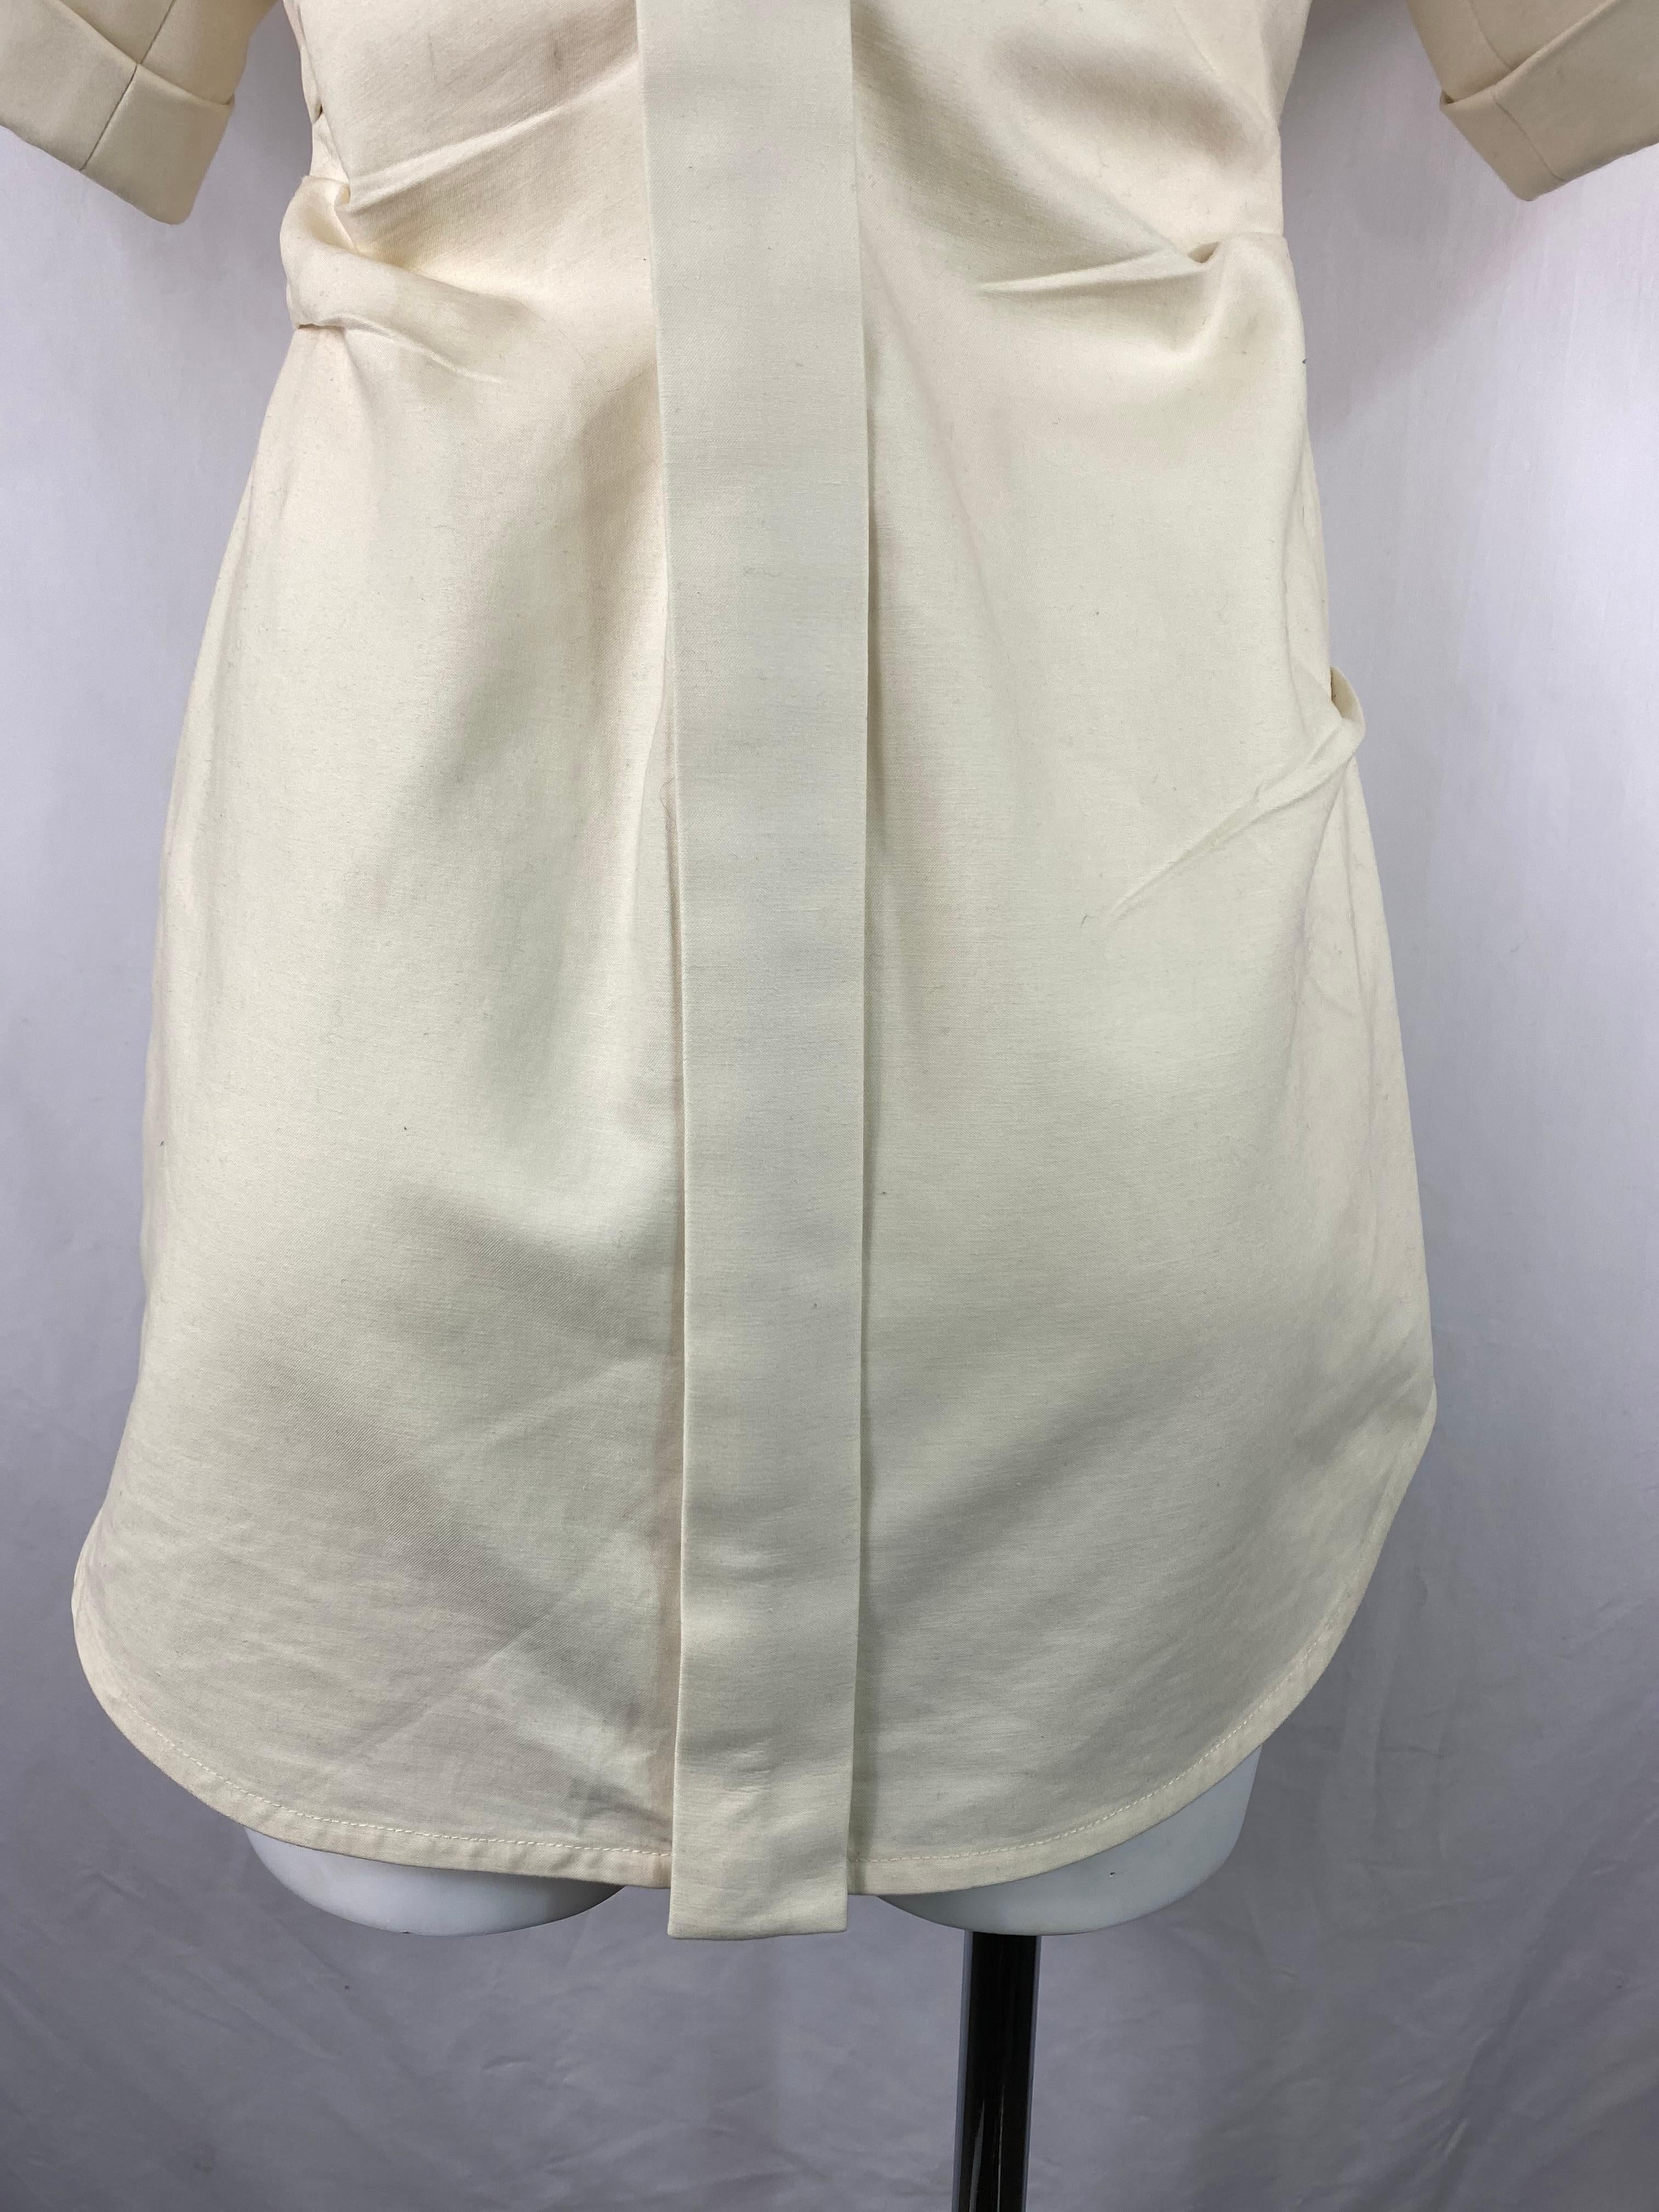 Jacquemus Cream, Ivory Cotton Shirt Top, Size 40 In Excellent Condition For Sale In Beverly Hills, CA